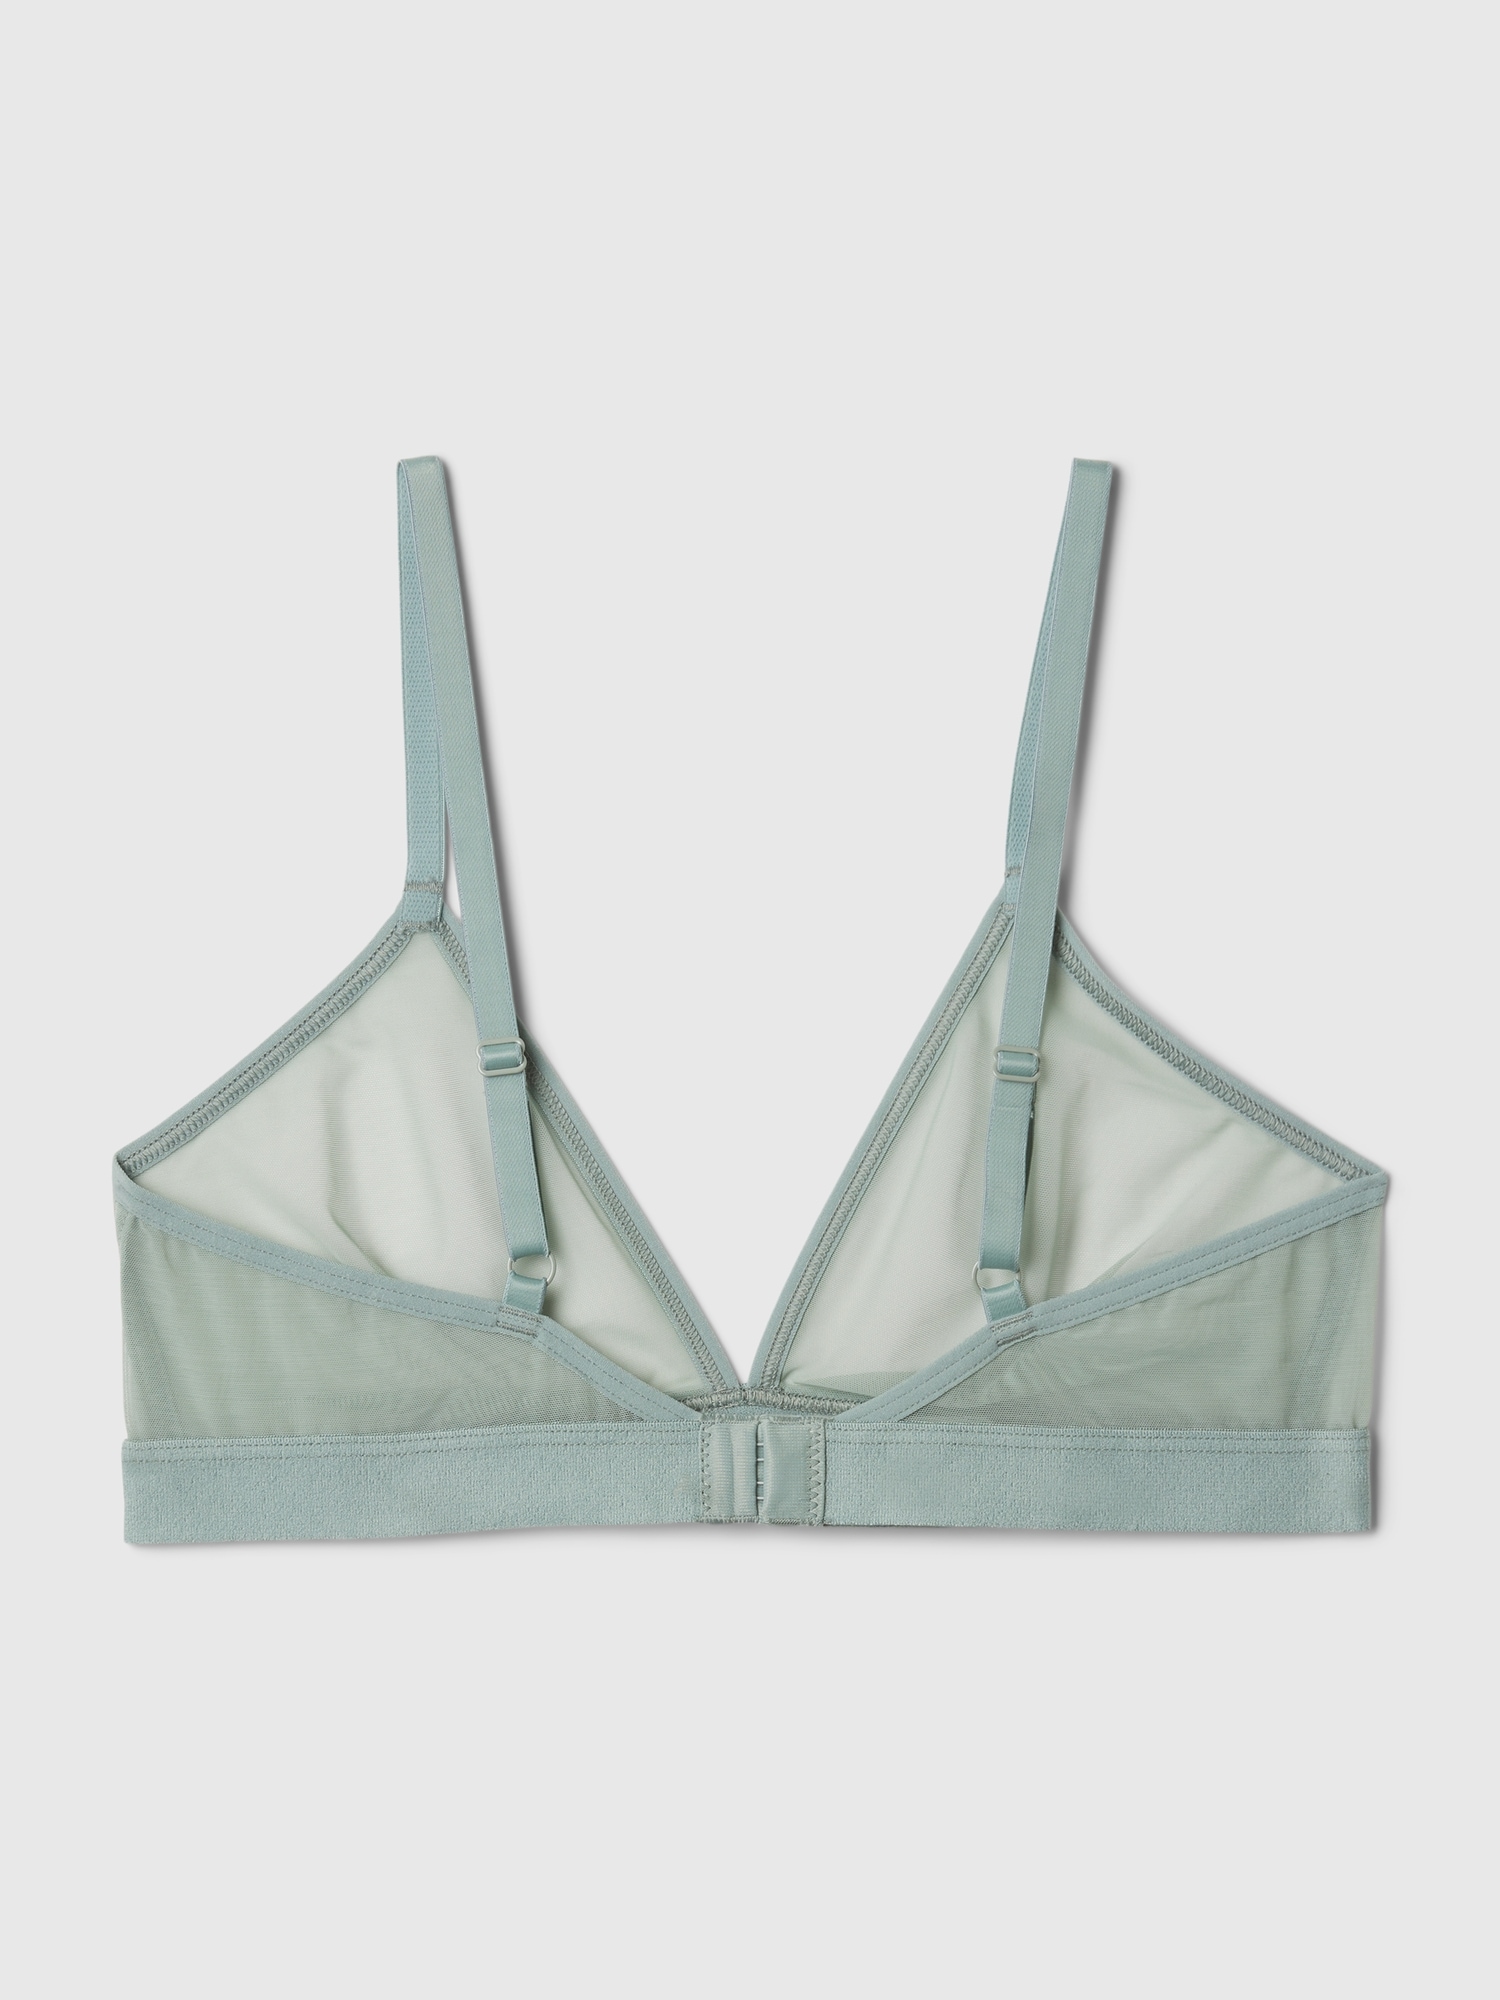 MESH BRA - with Rivets and Translucent Mesh Fabric - shiny gray